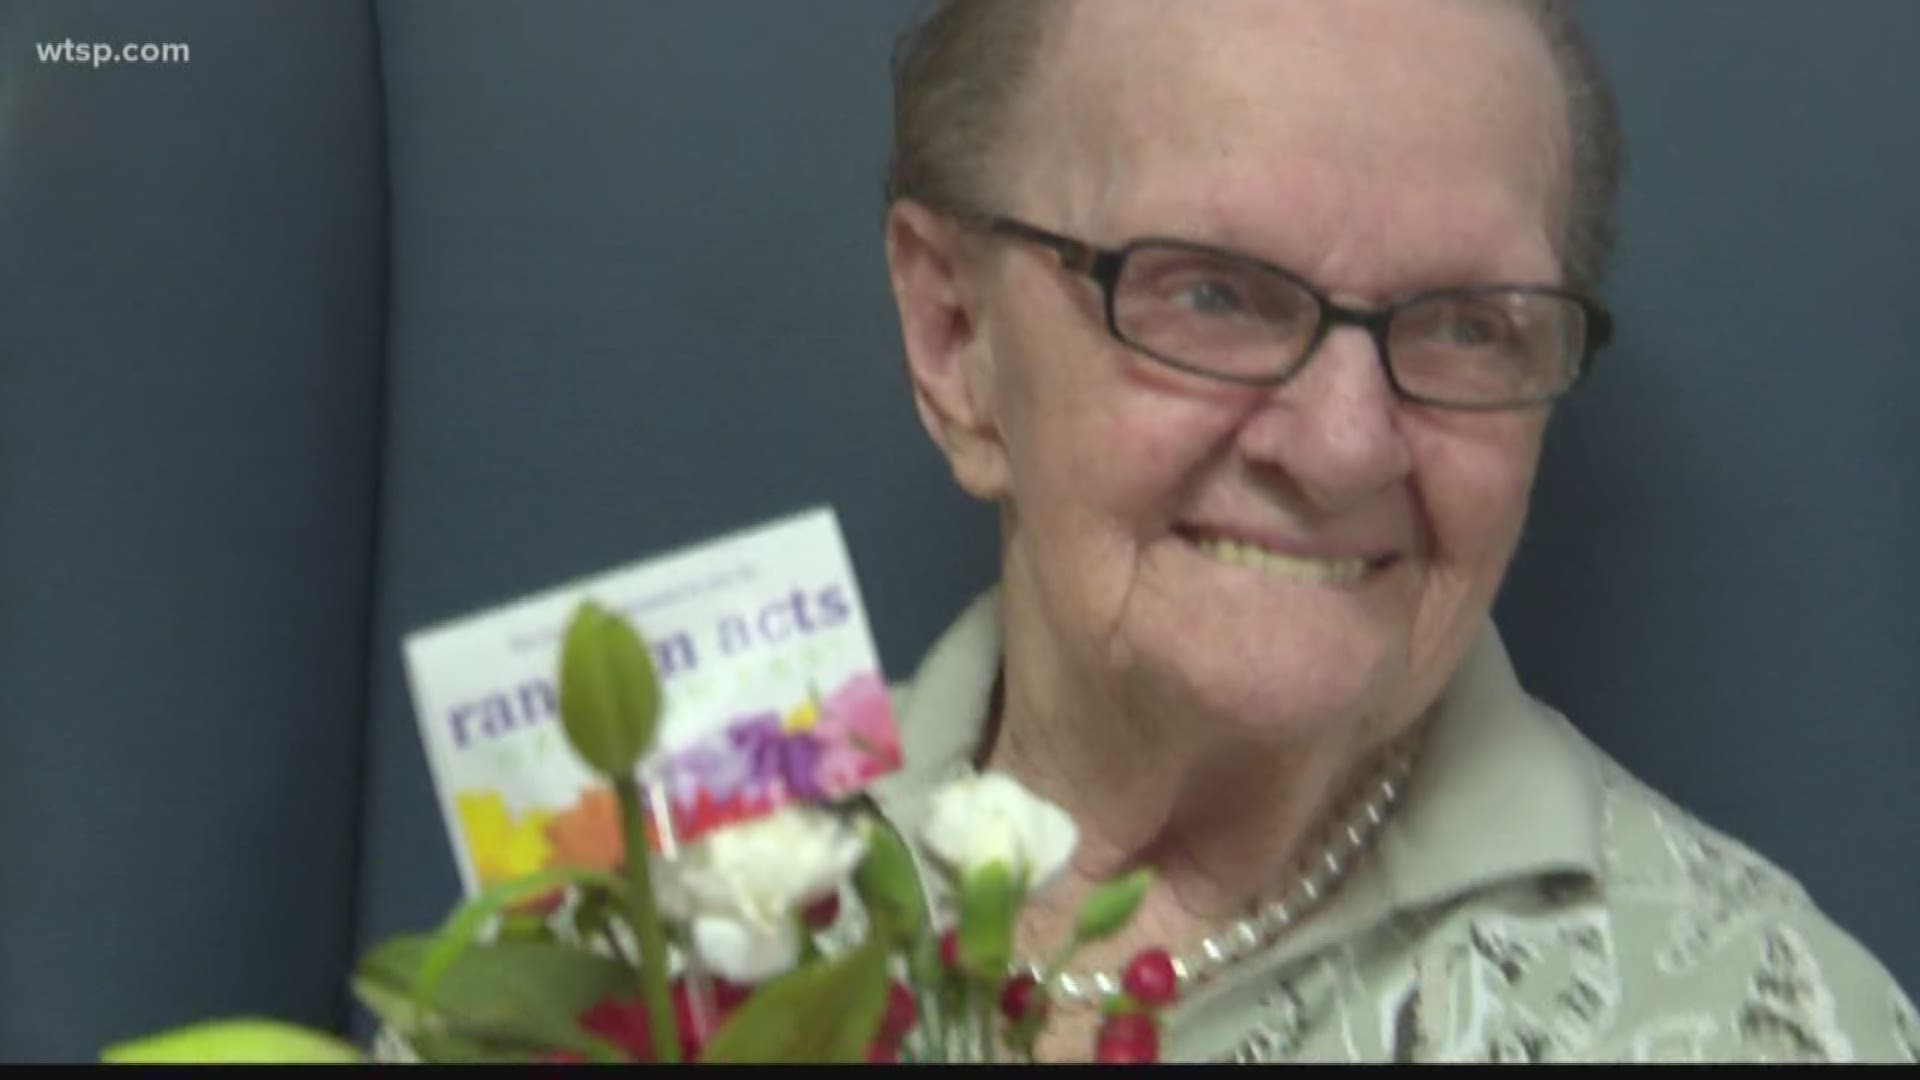 Dunedin company "Random Acts of Flowers" is taking flowers that would other-wise be tossed and donating them to nursing homes.